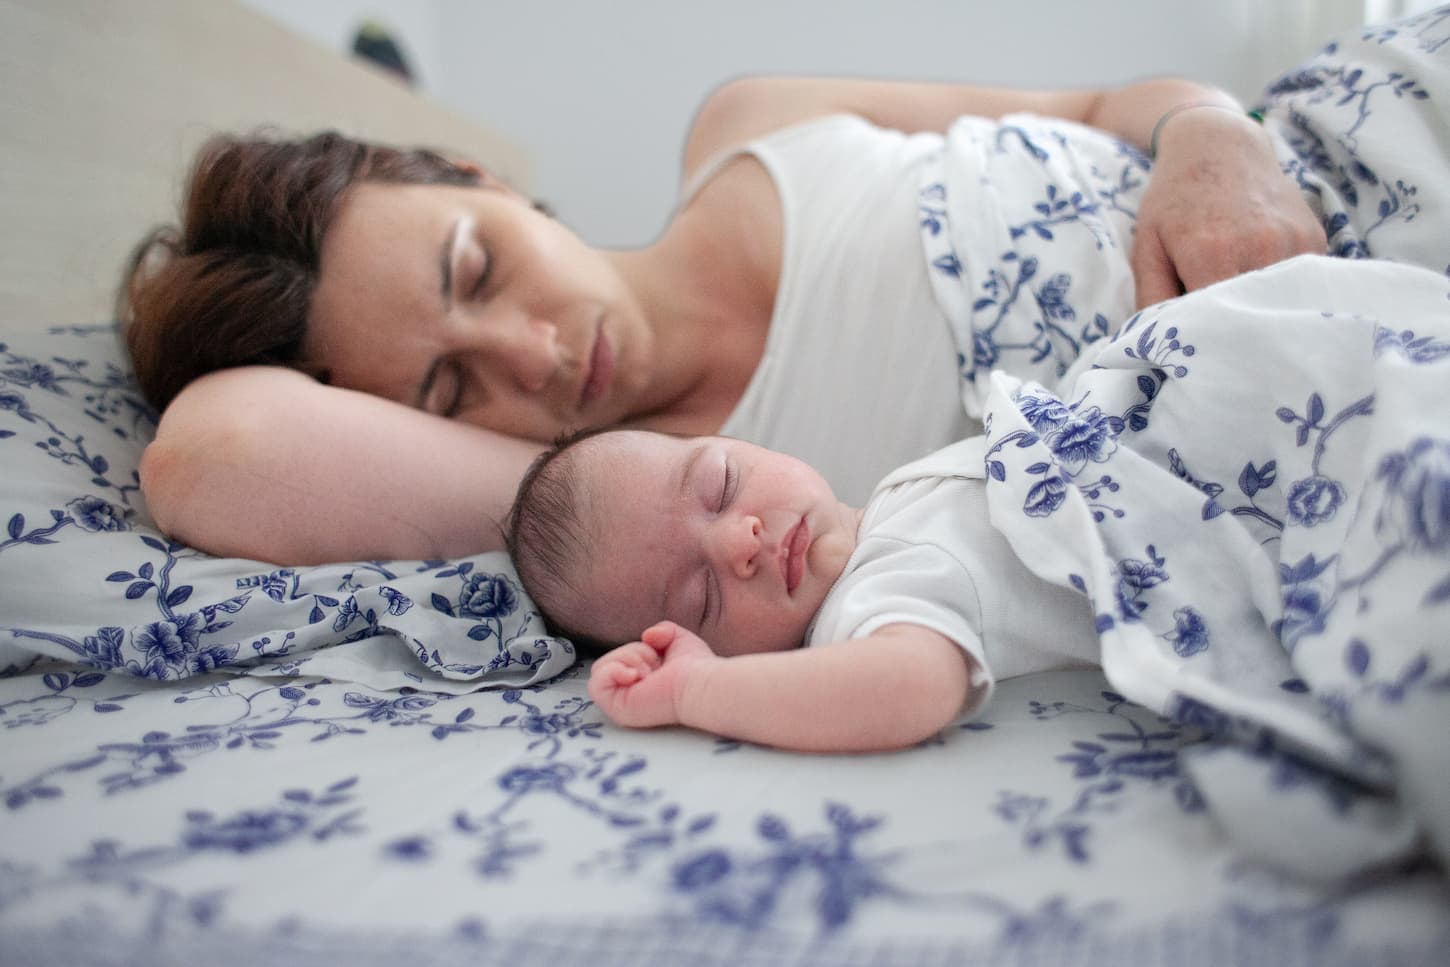 An image of a young mother sleeping next to her baby on the bed.